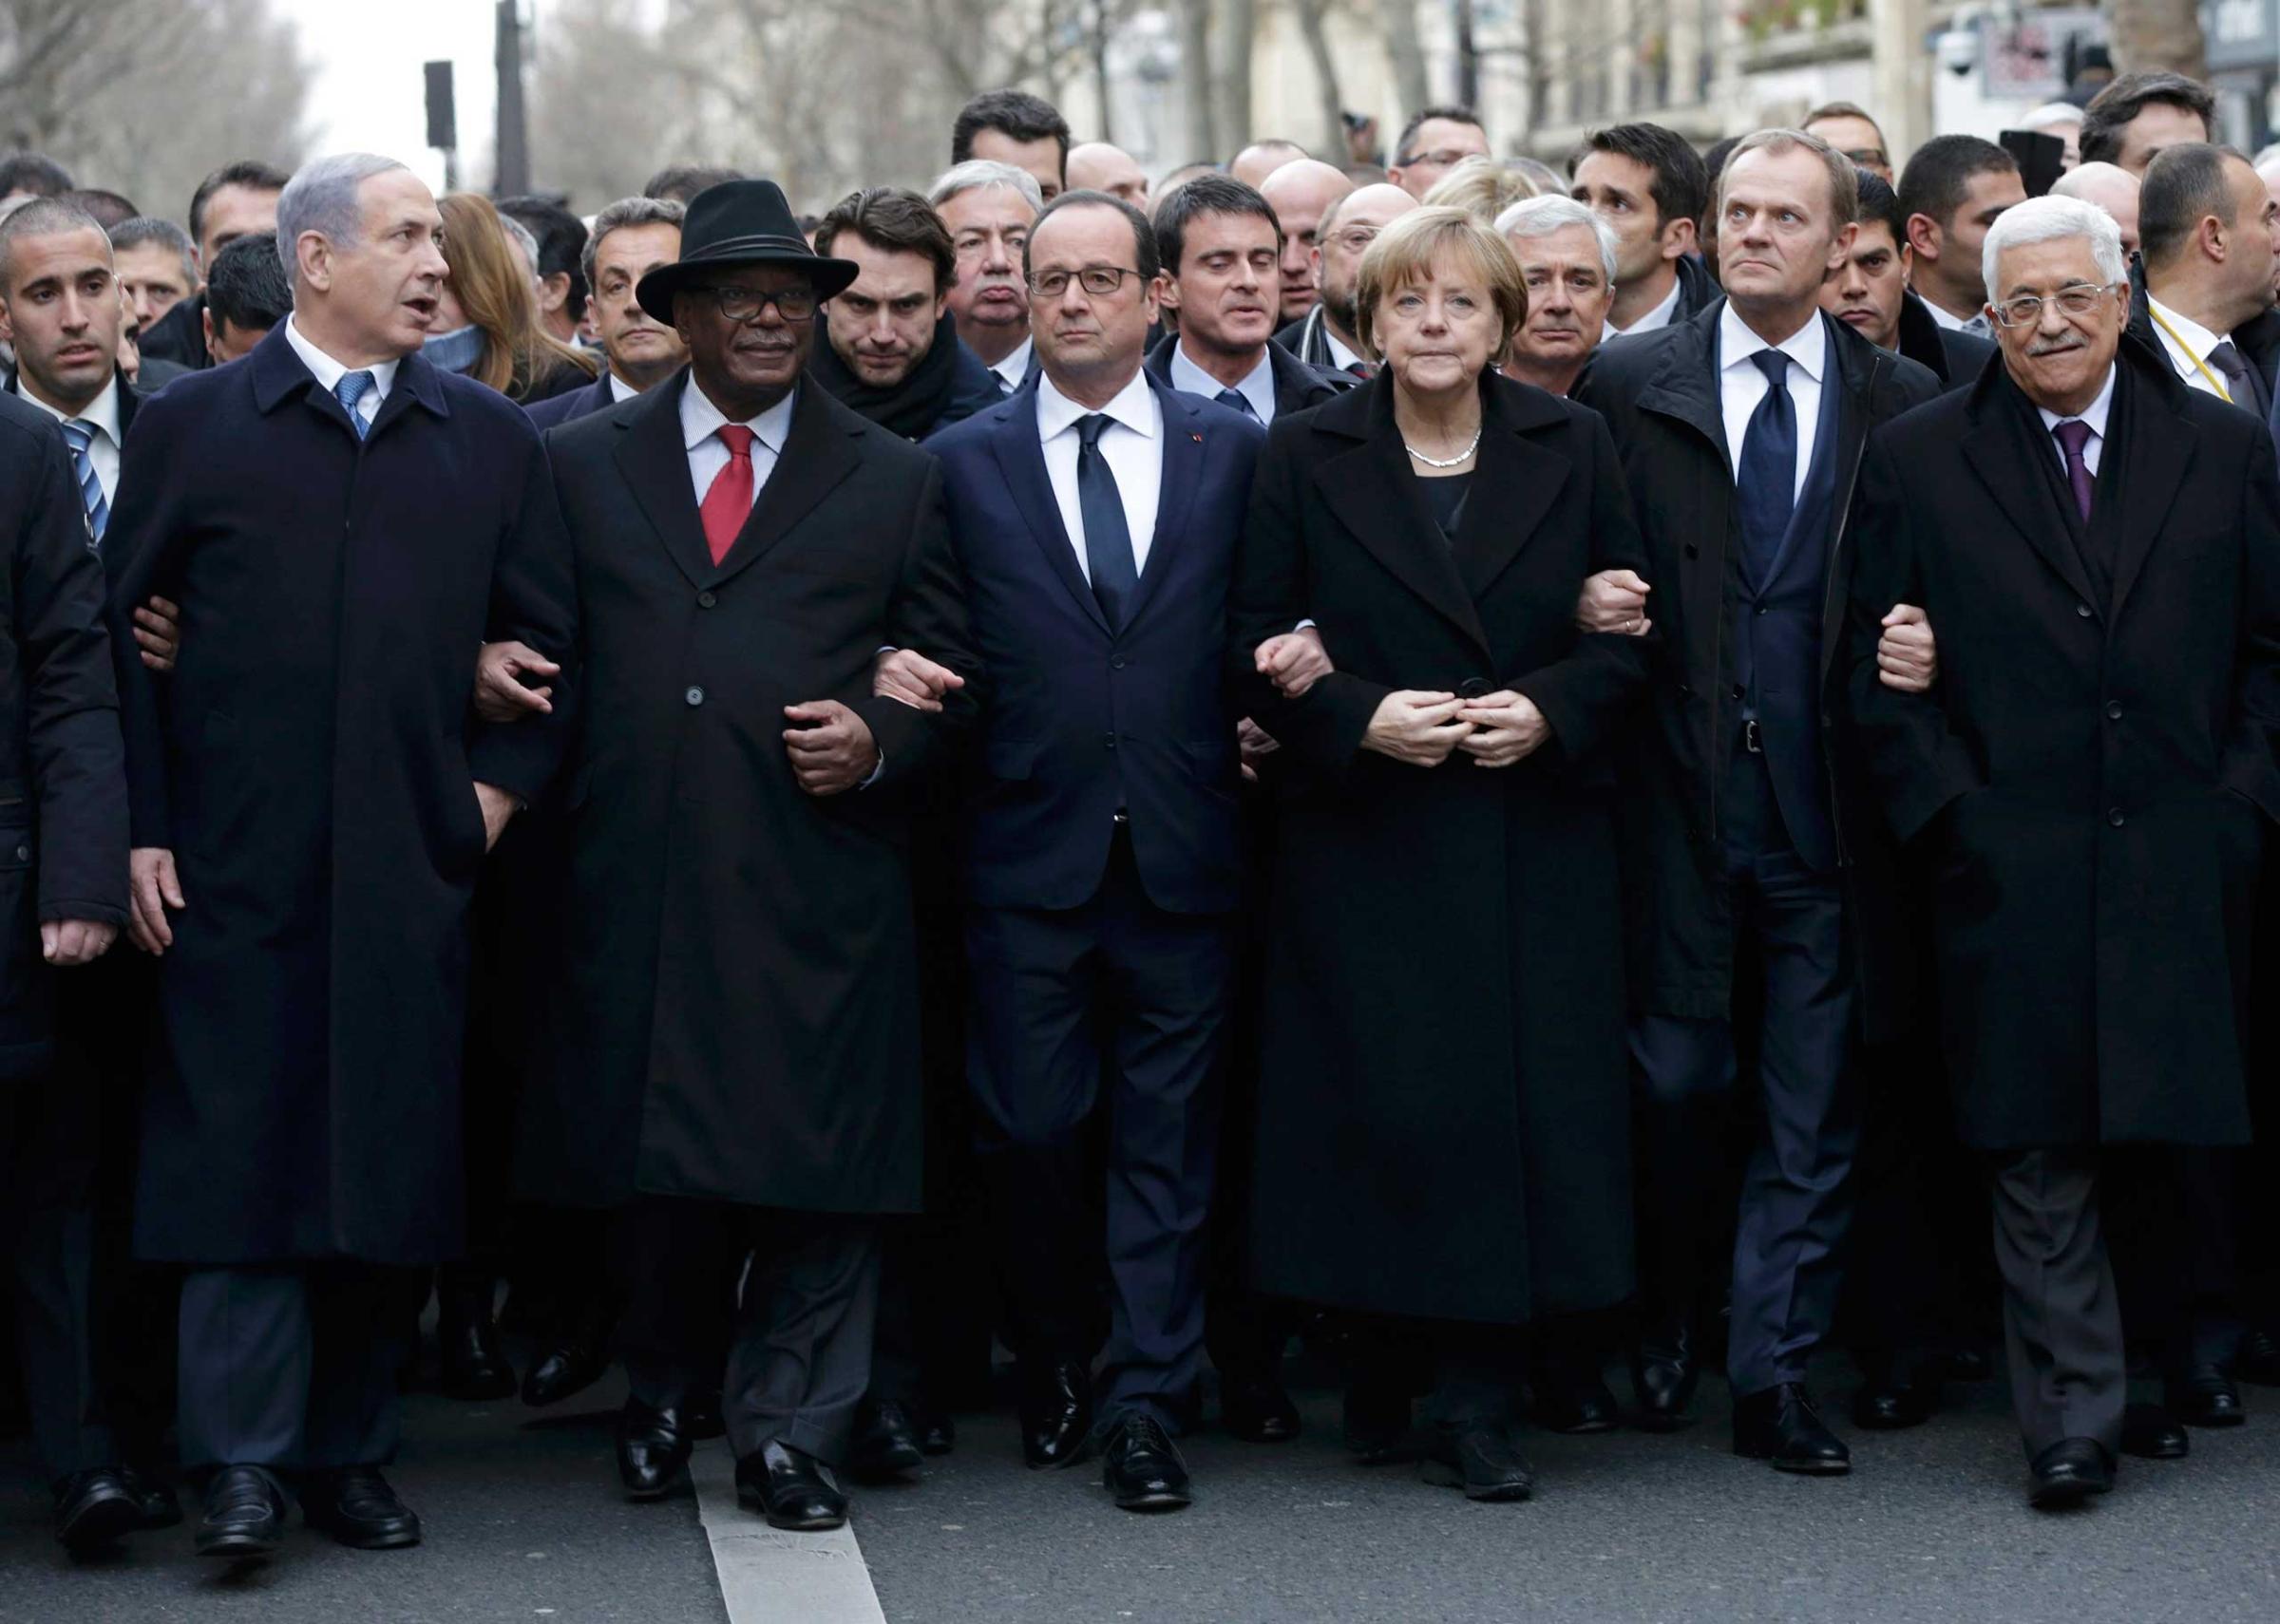 French President Francois Hollande is surrounded by head of states including Israel's Prime Minister Benjamin Netanyahu, Mali's President Ibrahim Boubacar Keita, Germany's Chancellor Angela Merkel, European Council President Donald Tusk and Palestinian President Mahmoud Abbas as they attend the solidarity march in the streets of Paris Jan. 11, 2015.